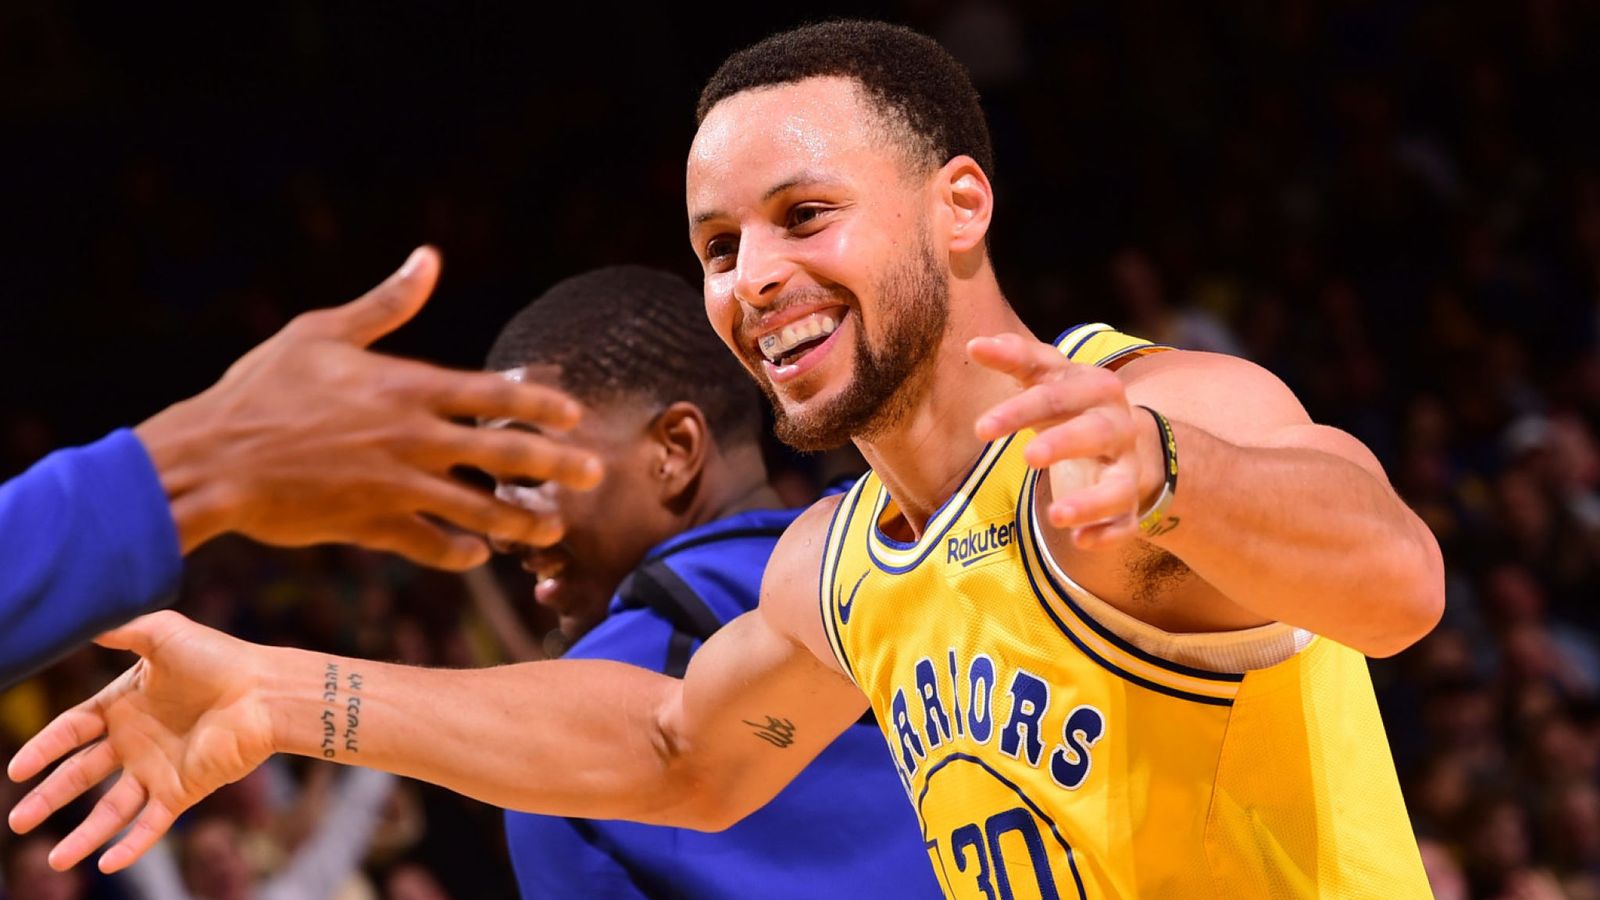 Stephen Curry celebrates during Golden State's win over Inidana